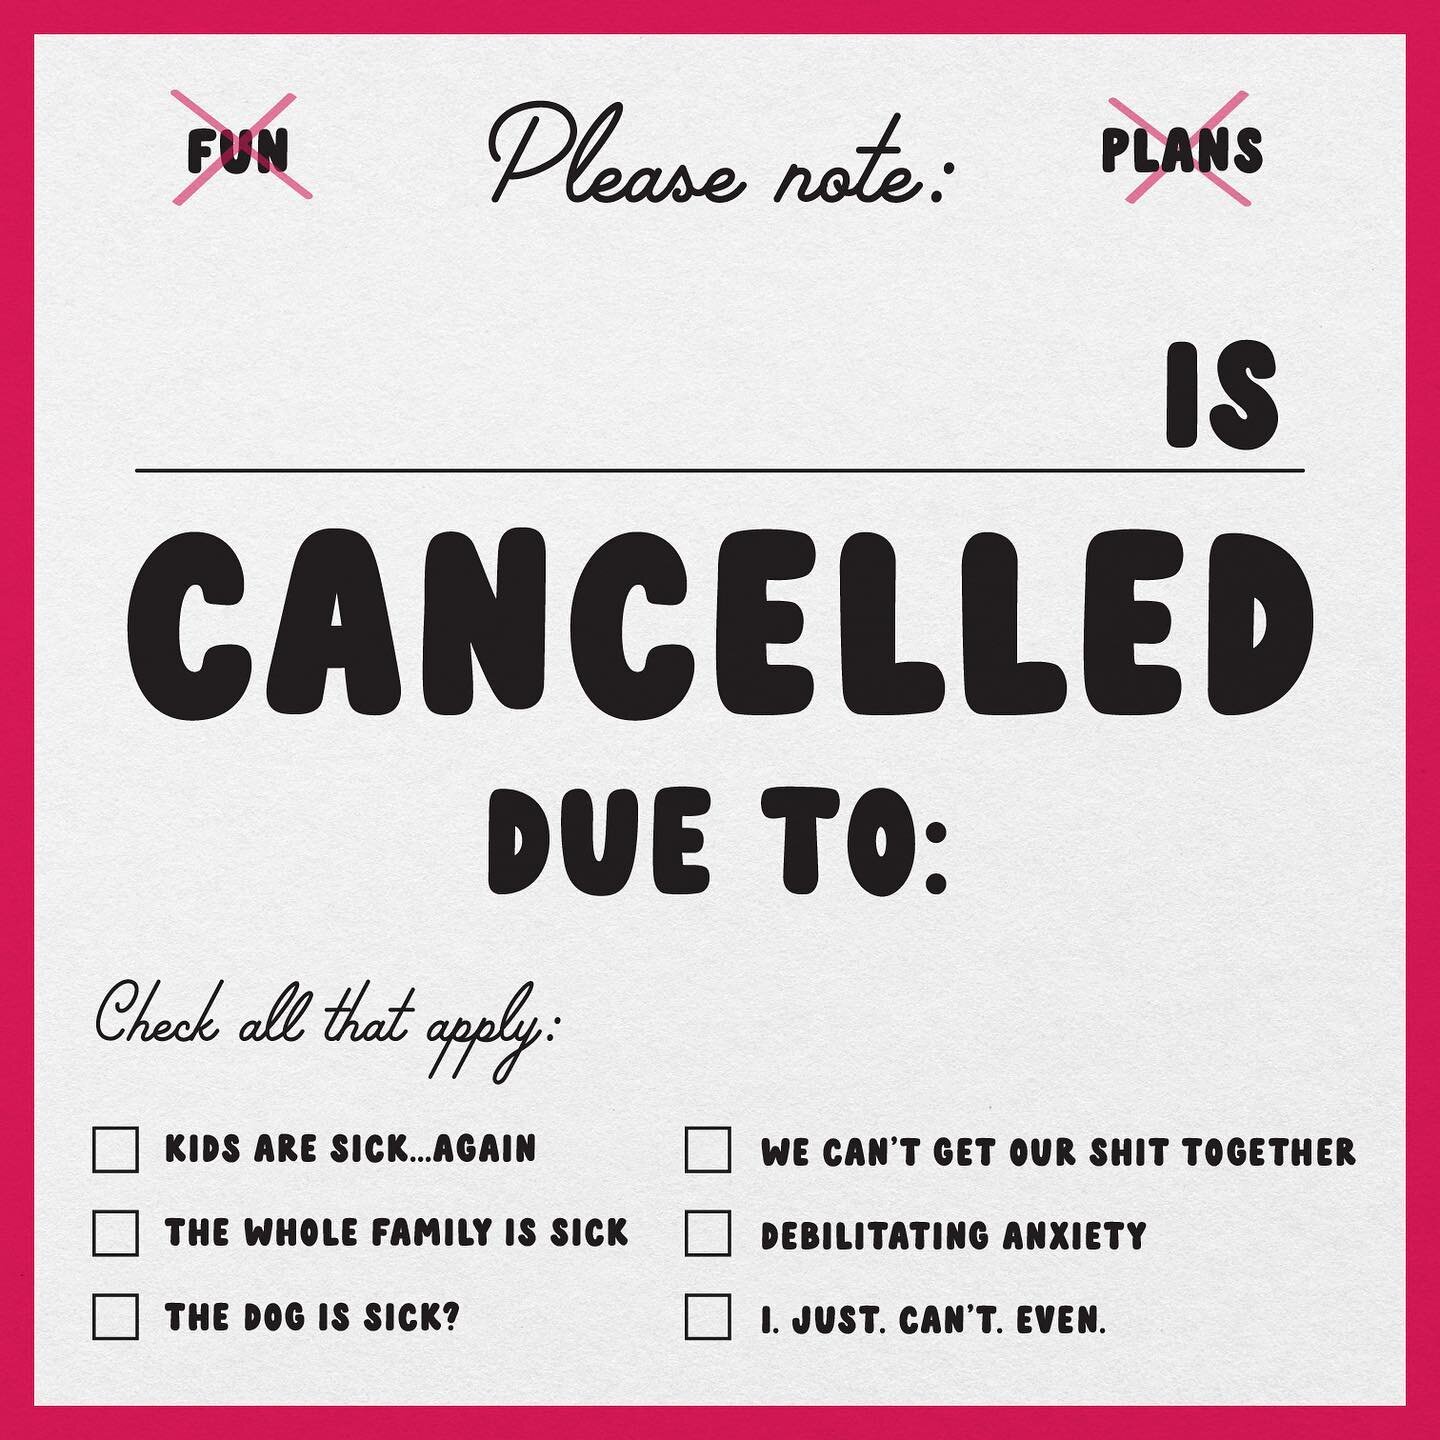 Anybody else out there? I&rsquo;m so bummed to keep canceling plans but the sickness just keeps coming with these kiddos. I made this so I could laugh instead of sob. #avlmom #cancelledplans #tellmecanyoufeelmenow